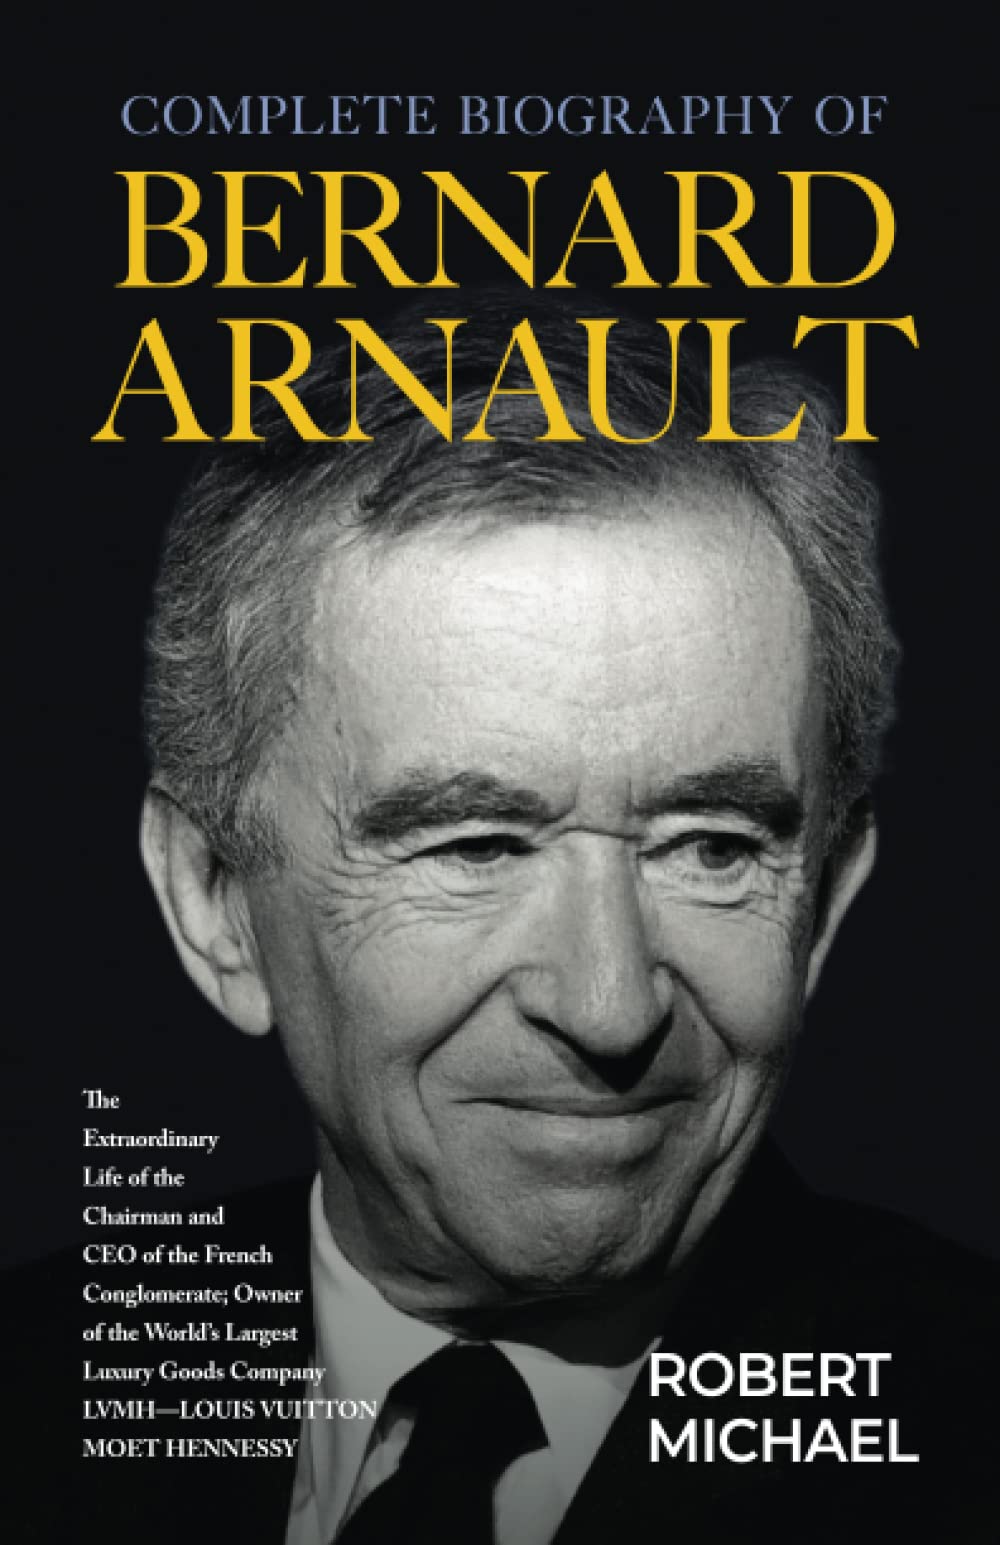 Complete Biography of Bernard Arnault: The Extraordinary Life of the Chairman and CEO of the French Conglomerate; Owner of the World Largest Luxury Goods Company LVMH-Luis Vuitton Moet Hennessy